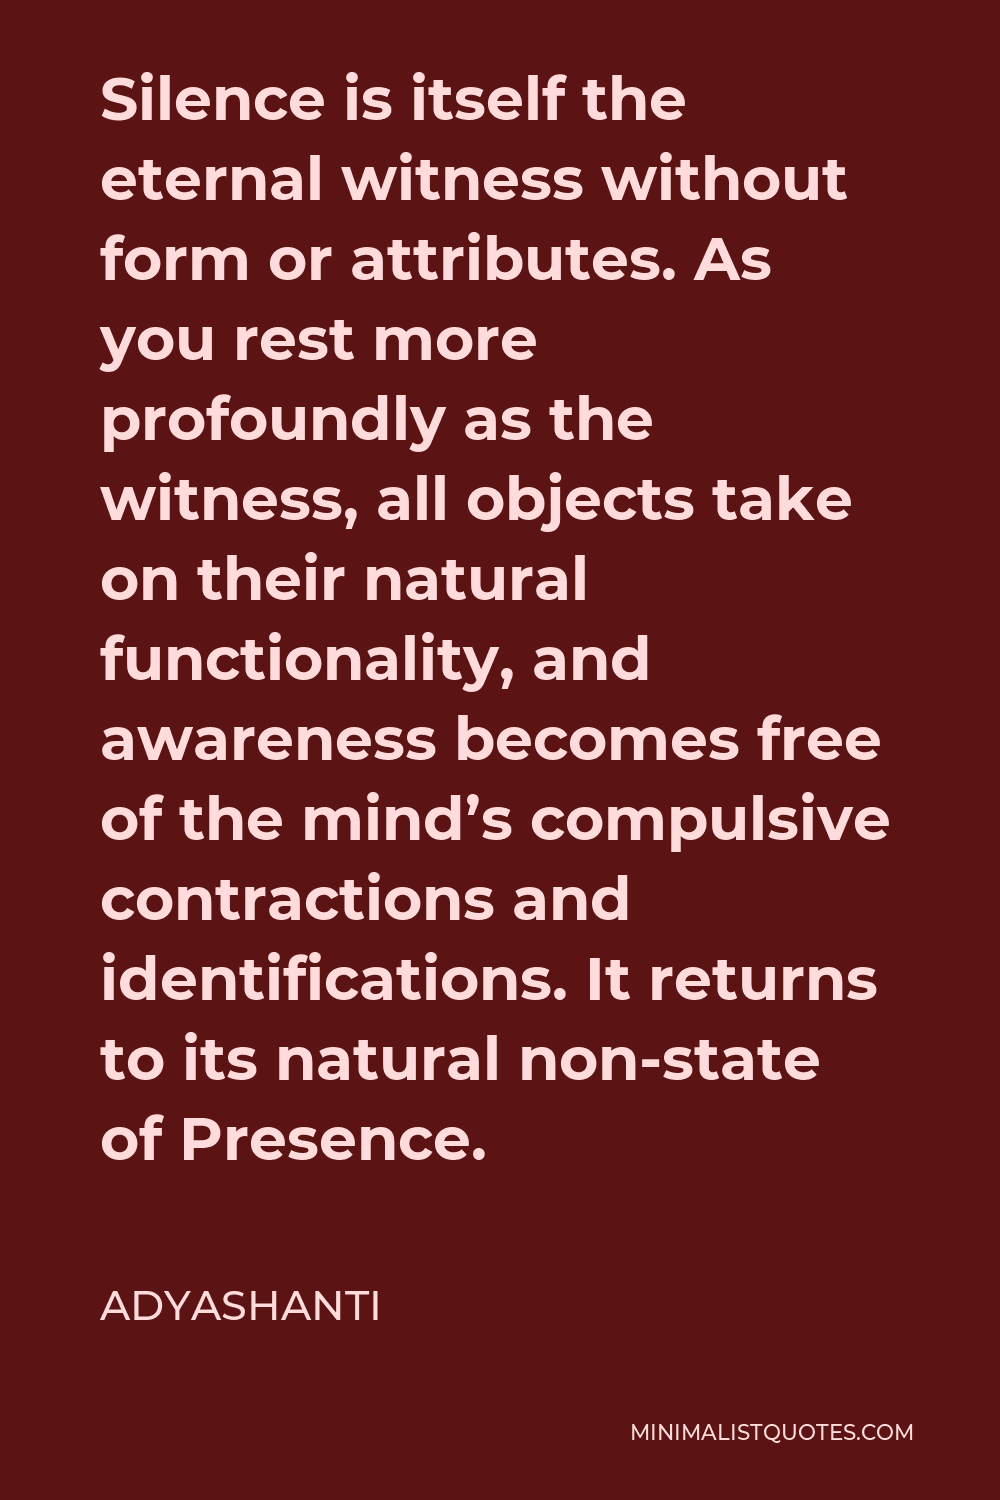 Adyashanti Quote - Silence is itself the eternal witness without form or attributes. As you rest more profoundly as the witness, all objects take on their natural functionality, and awareness becomes free of the mind’s compulsive contractions and identifications. It returns to its natural non-state of Presence.